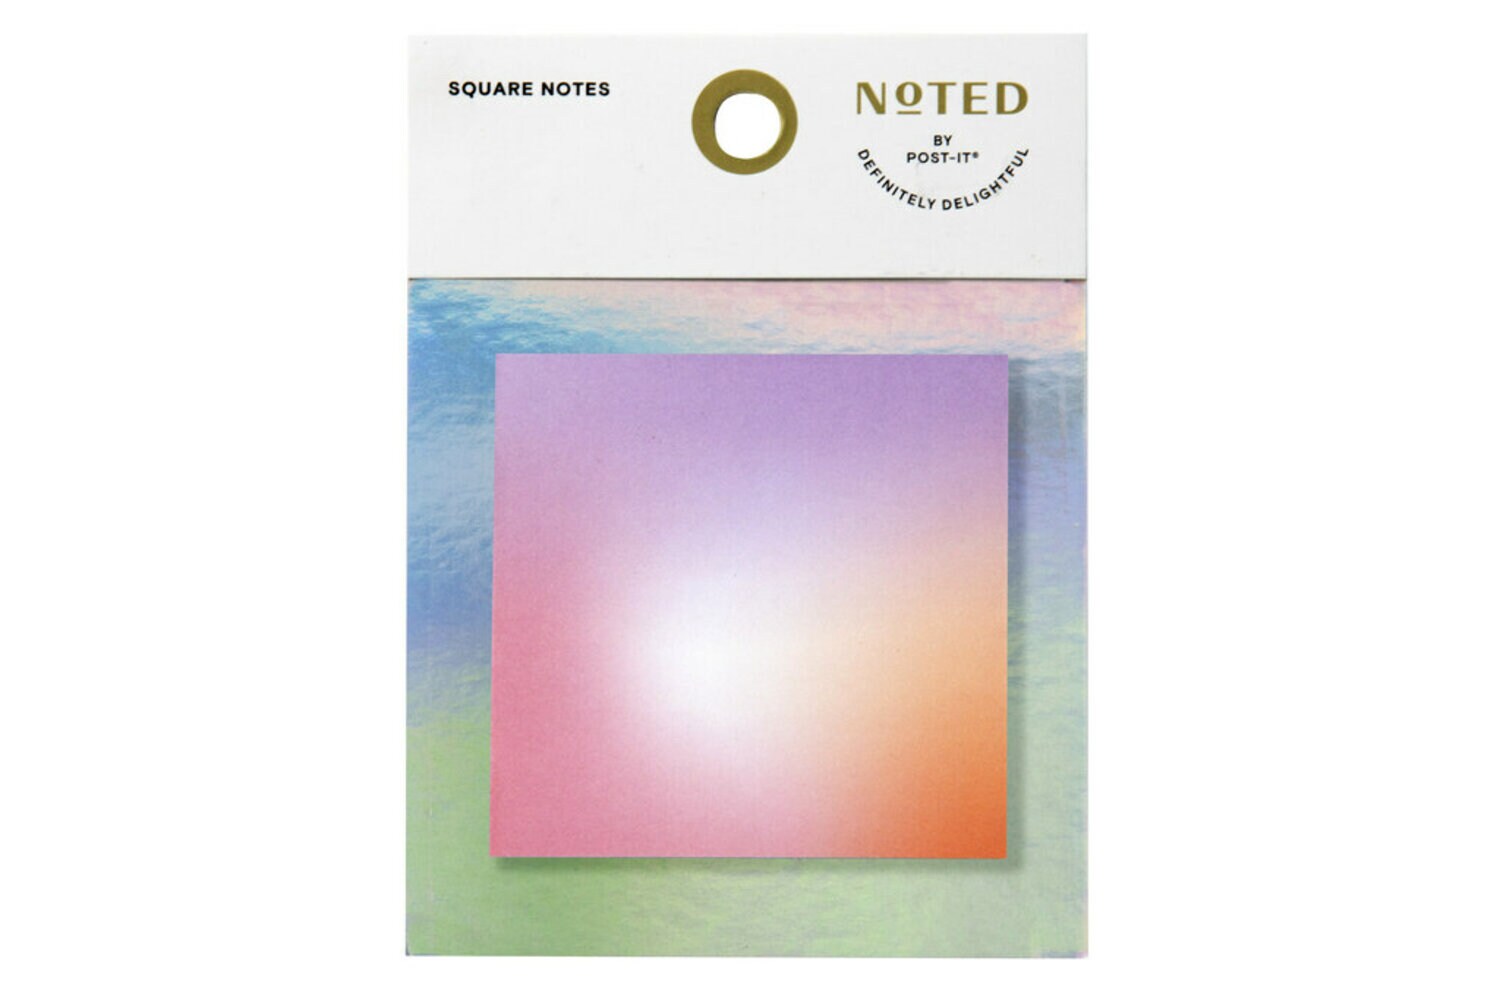 7100288909 - Post-it Square Notes NTD7-33-2, 2.9 in x 2.8 in (73 mm x 71 mm)